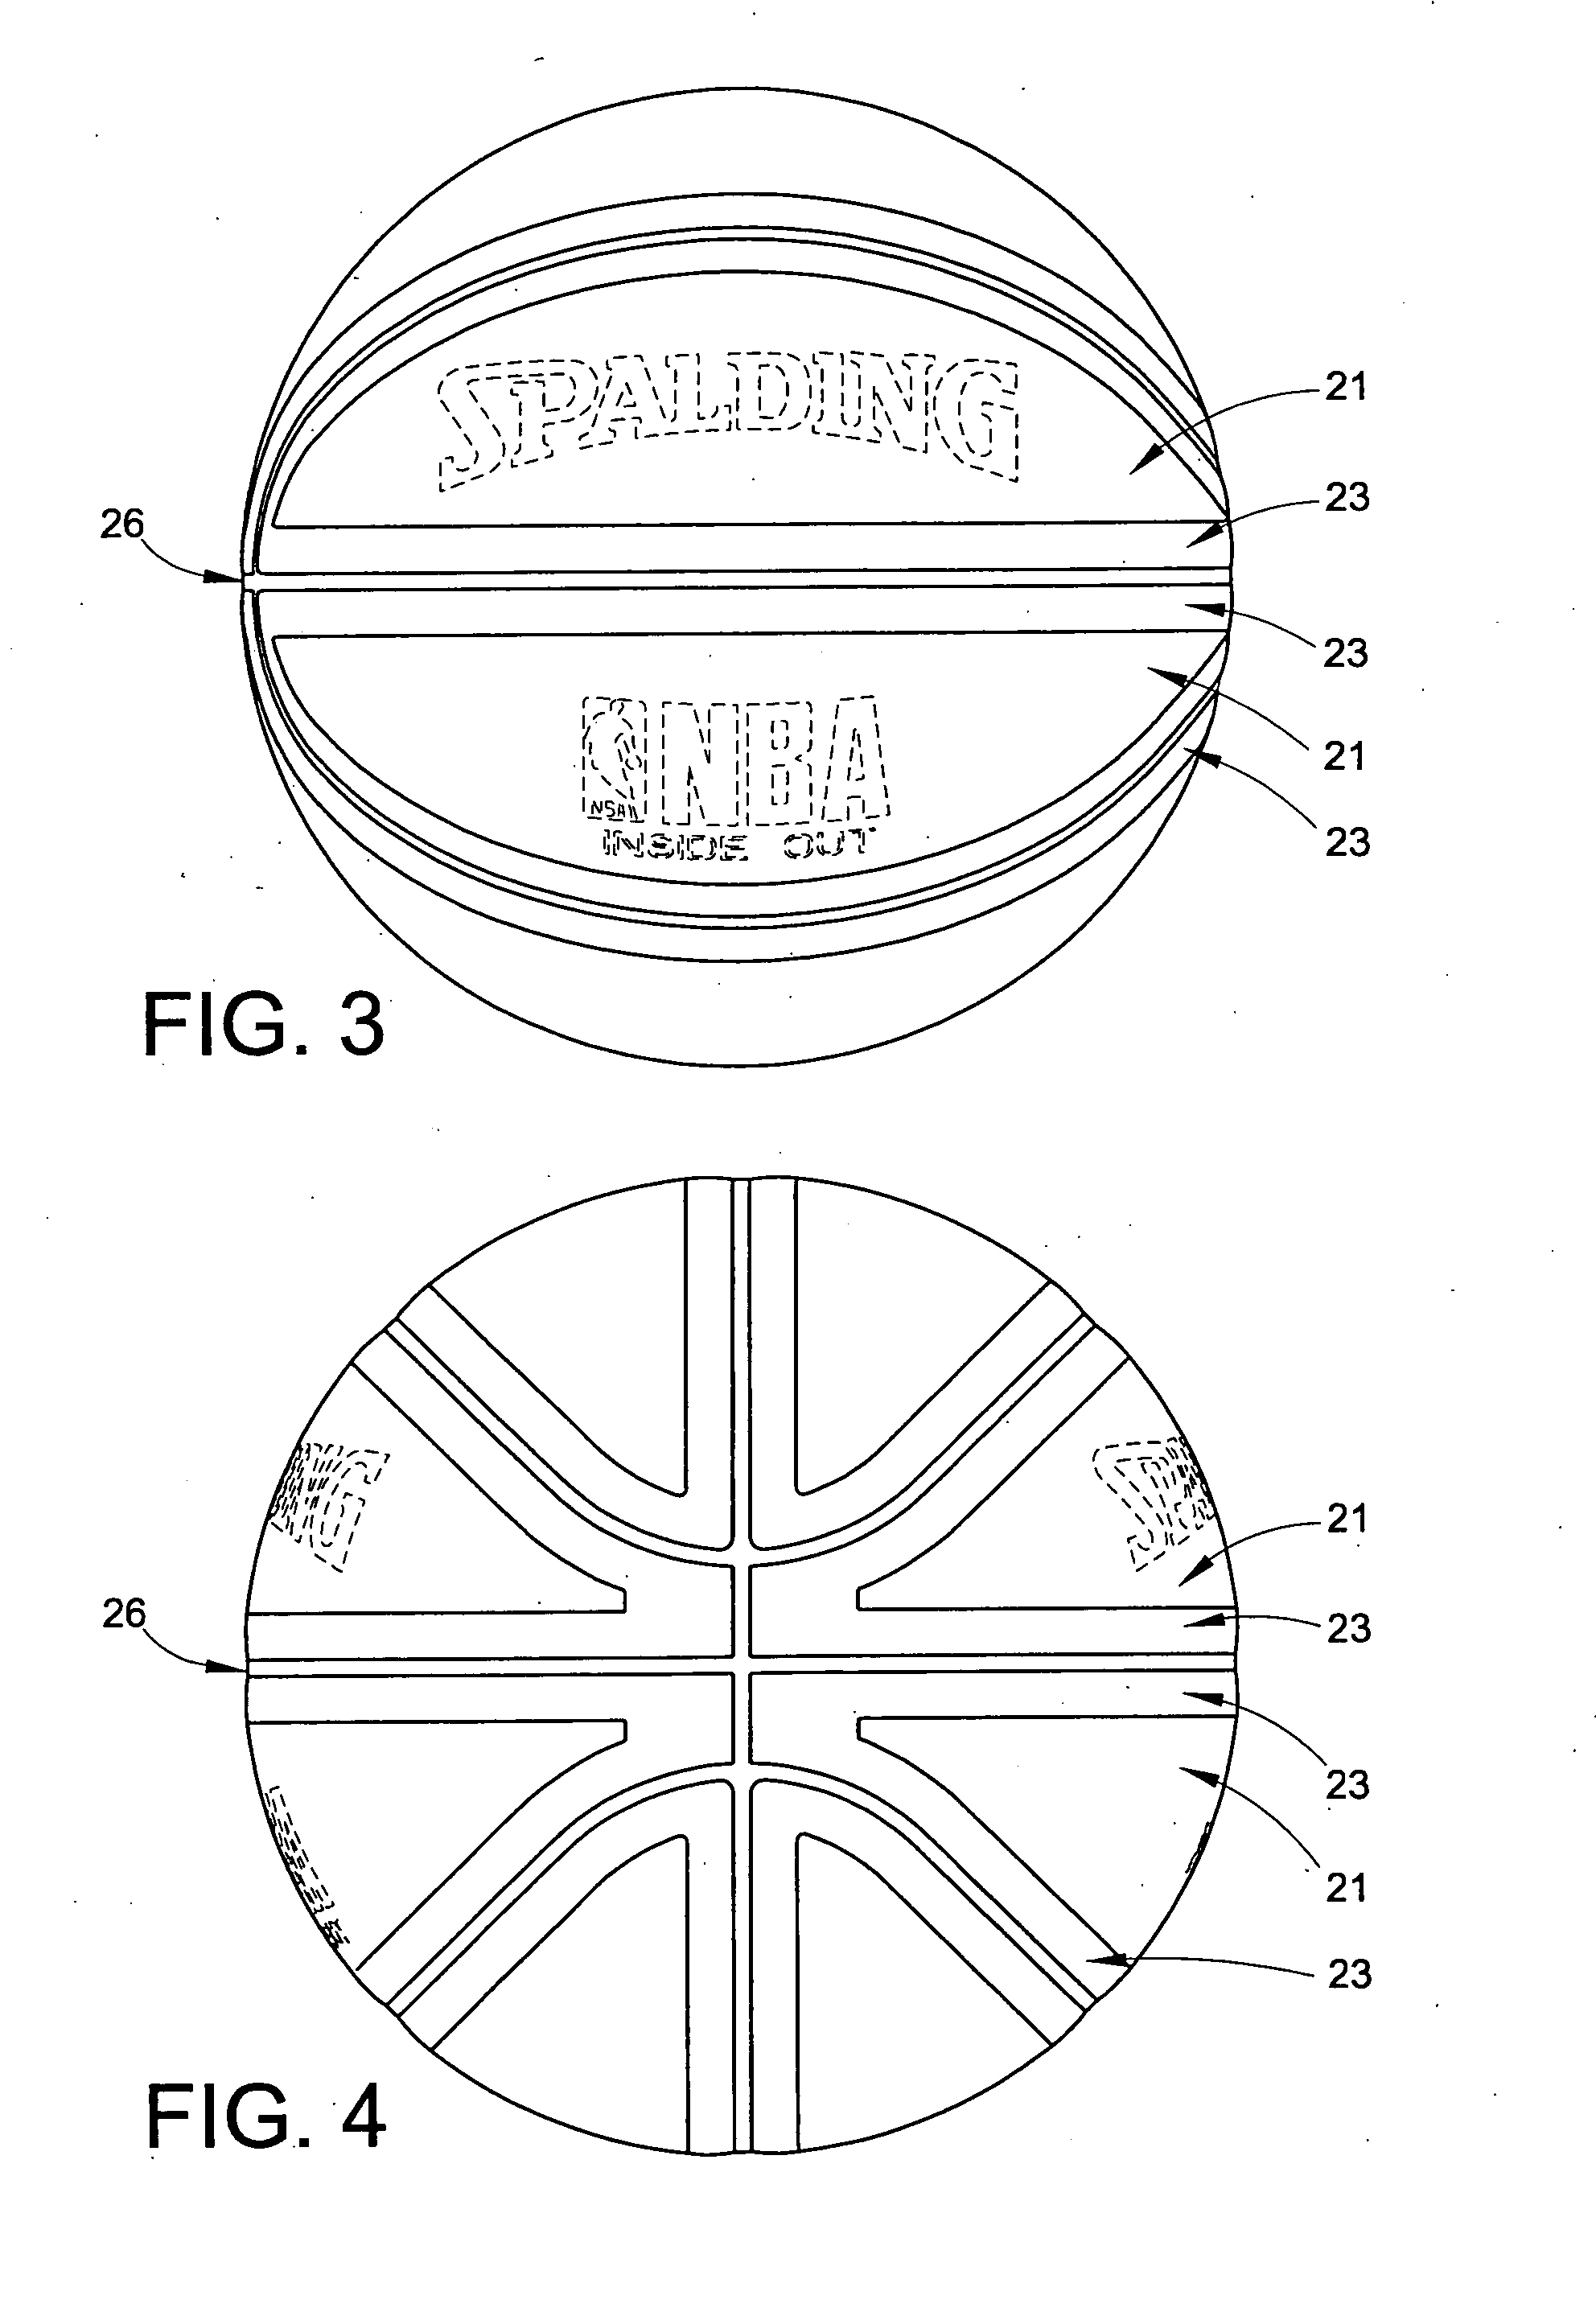 Sportsball and method of manufacturing same